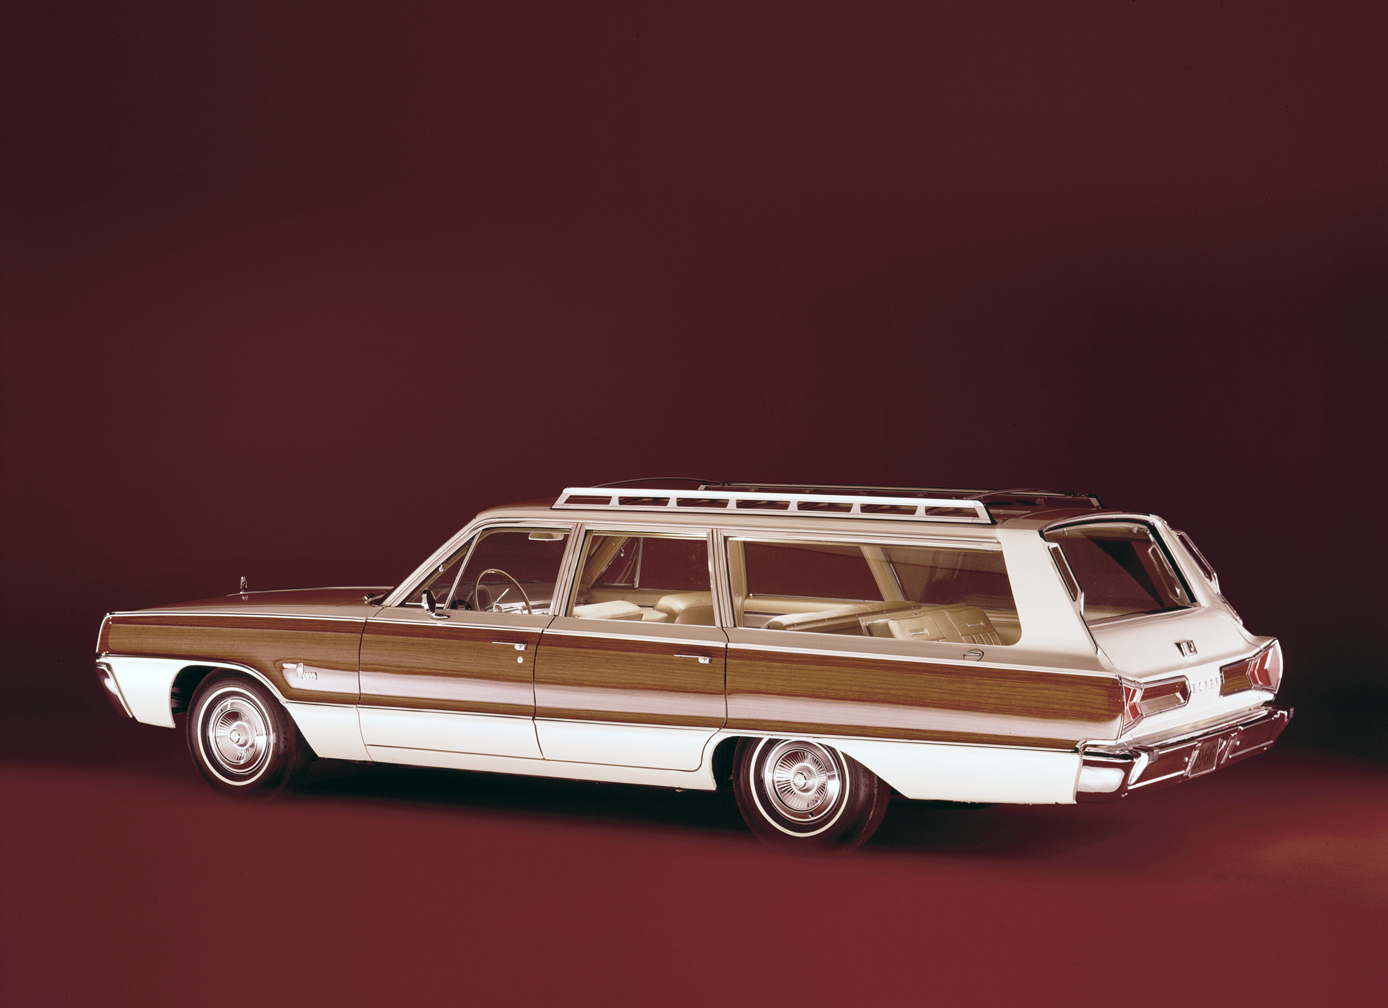 View, Download, Rate, and Comment on this 1970 Dodge Monaco Station Wagon I...